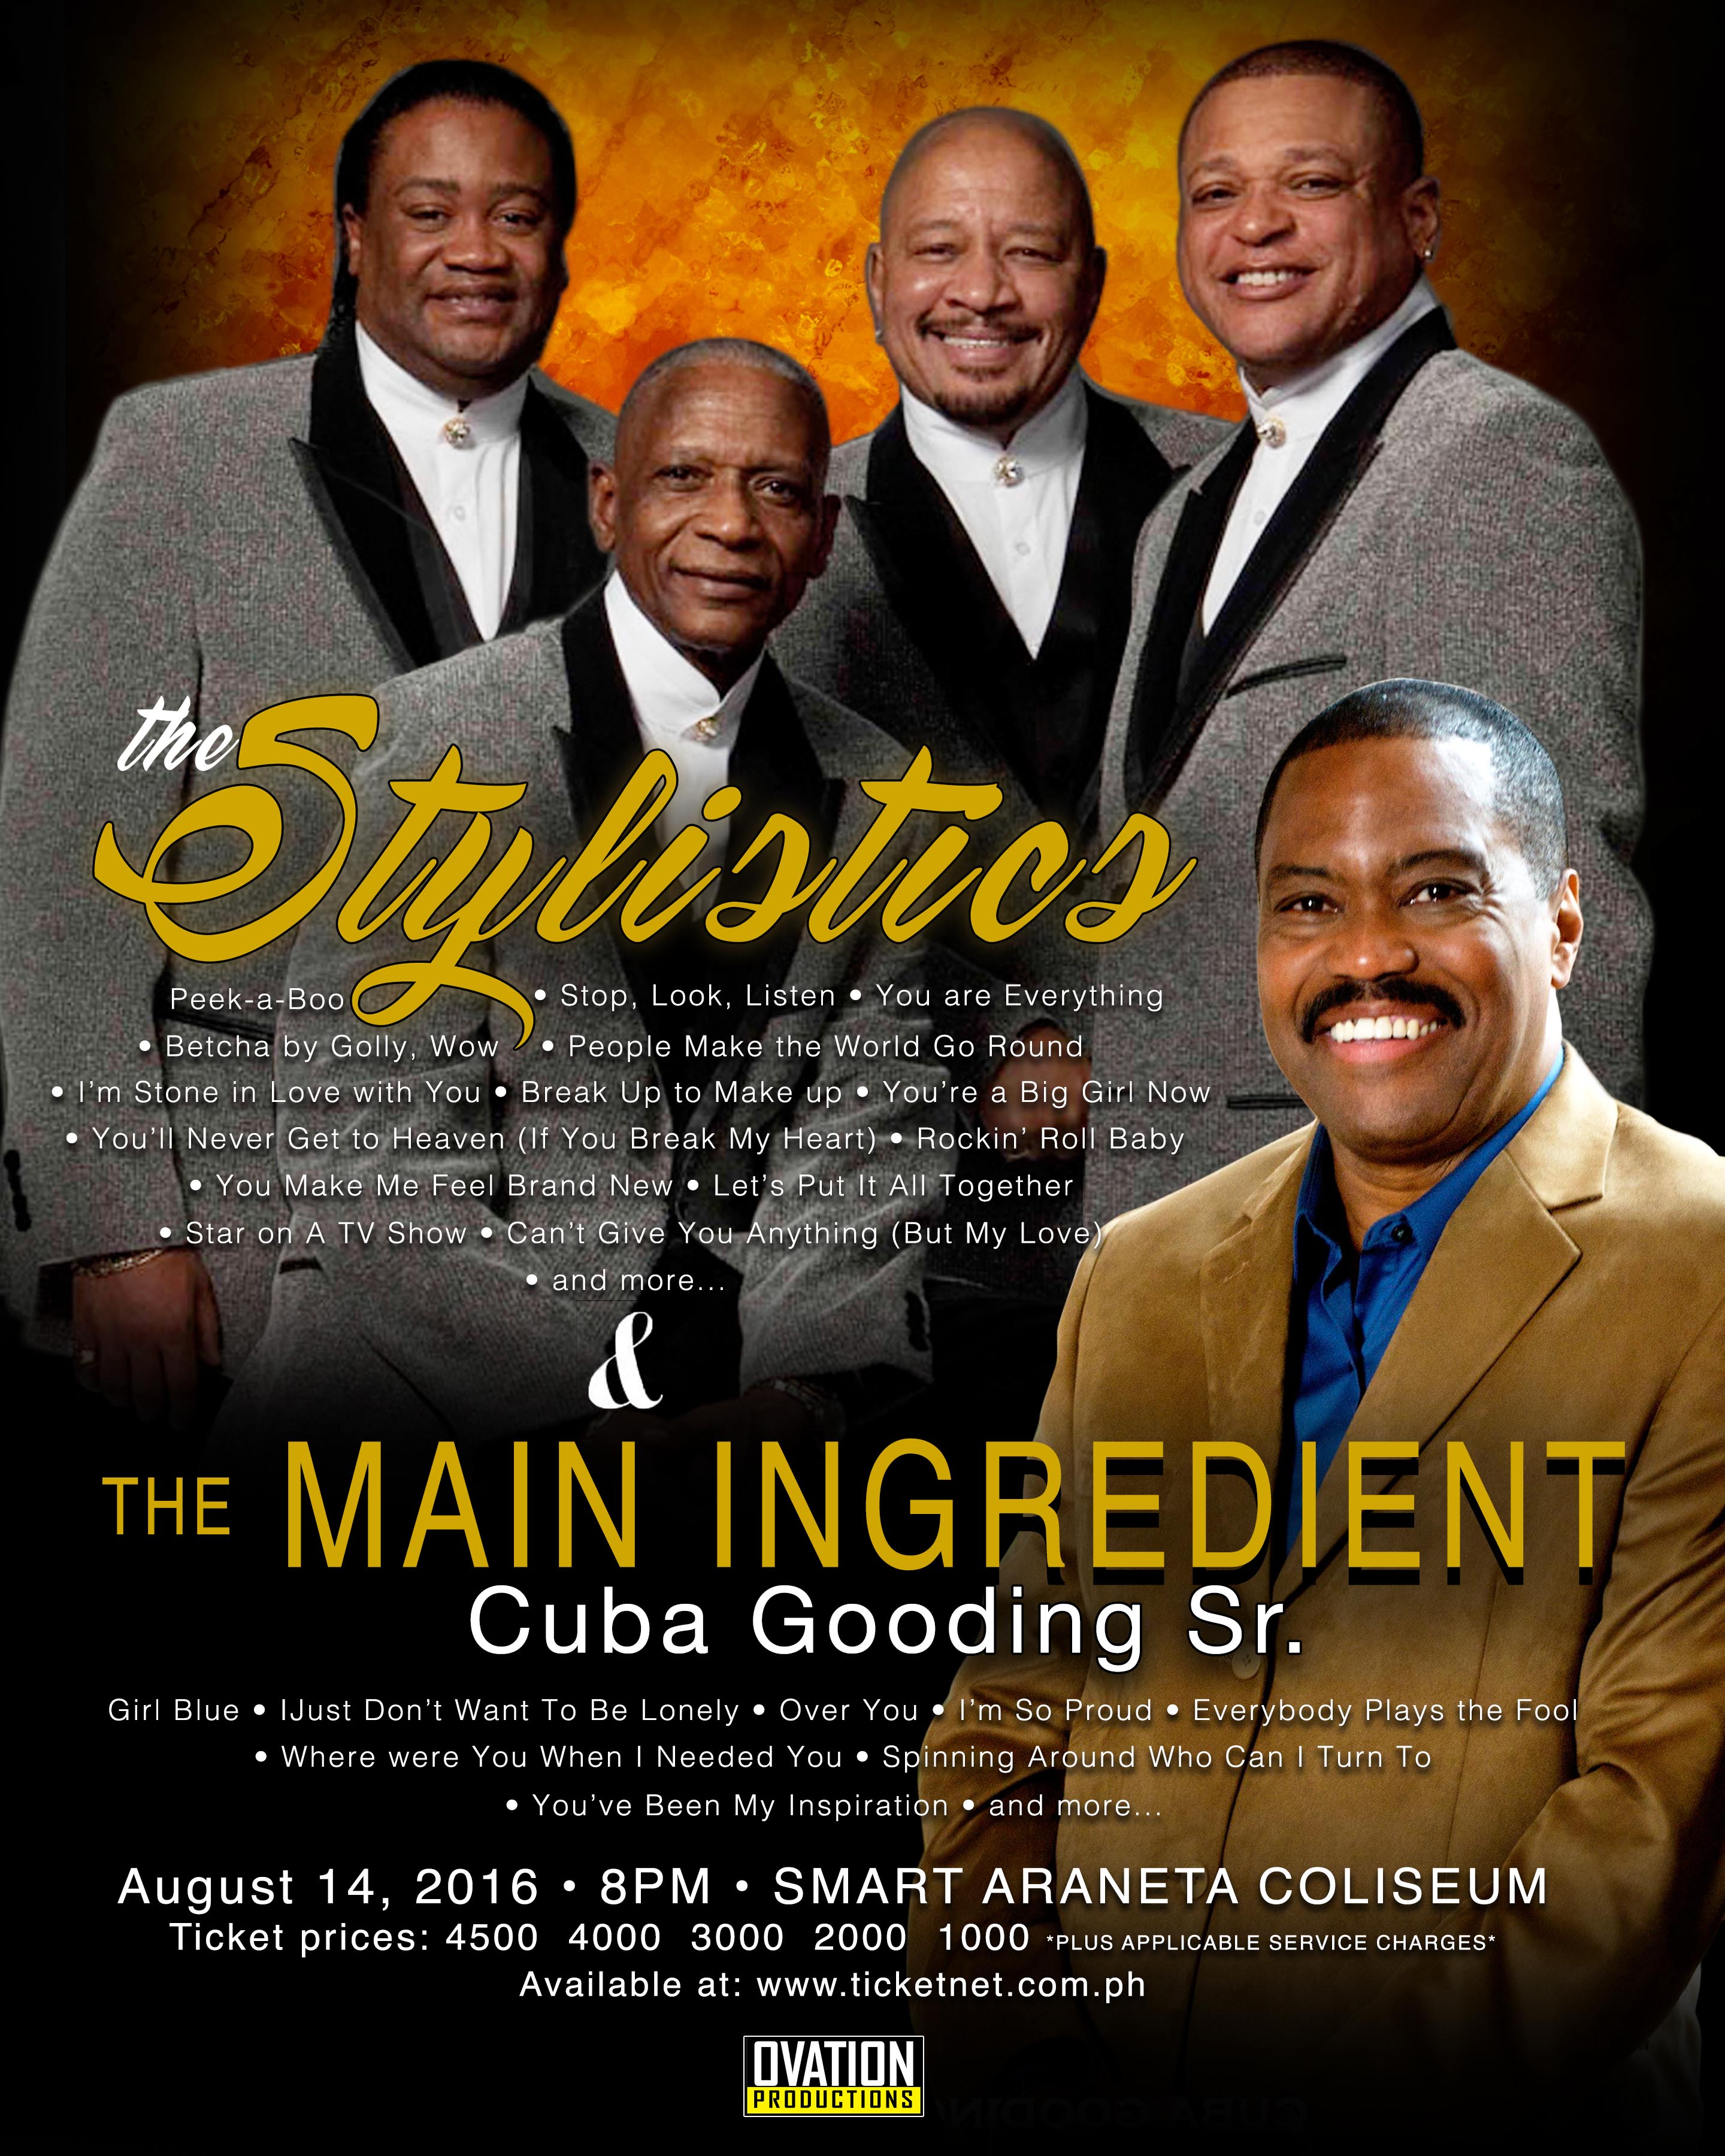 The Stylistics and The Main Ingredient at the Big Dome Concert on August 14